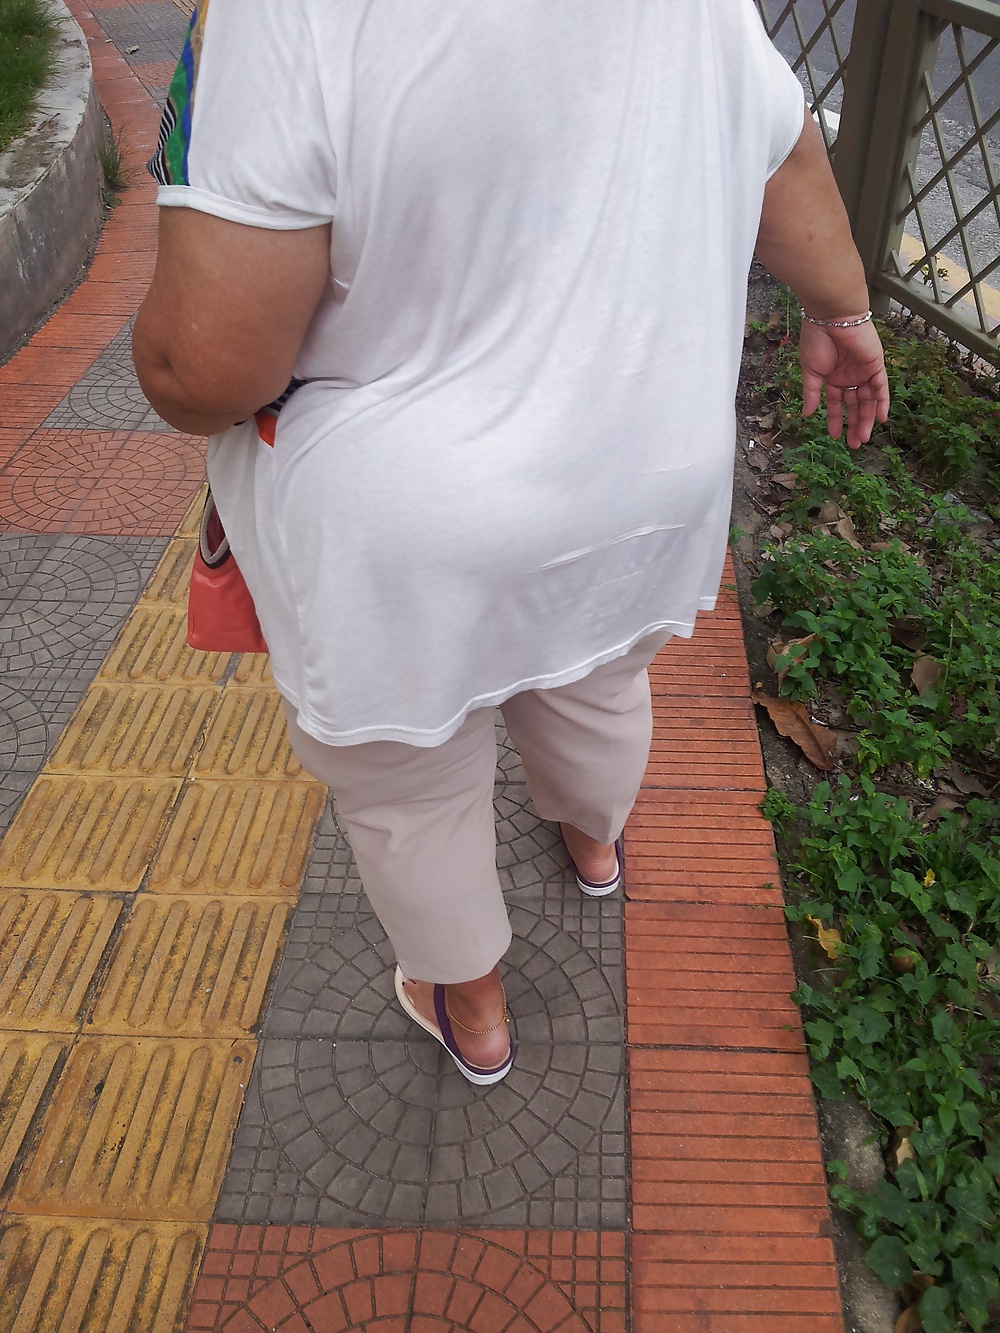 Chubby Chinese Granny #30233657